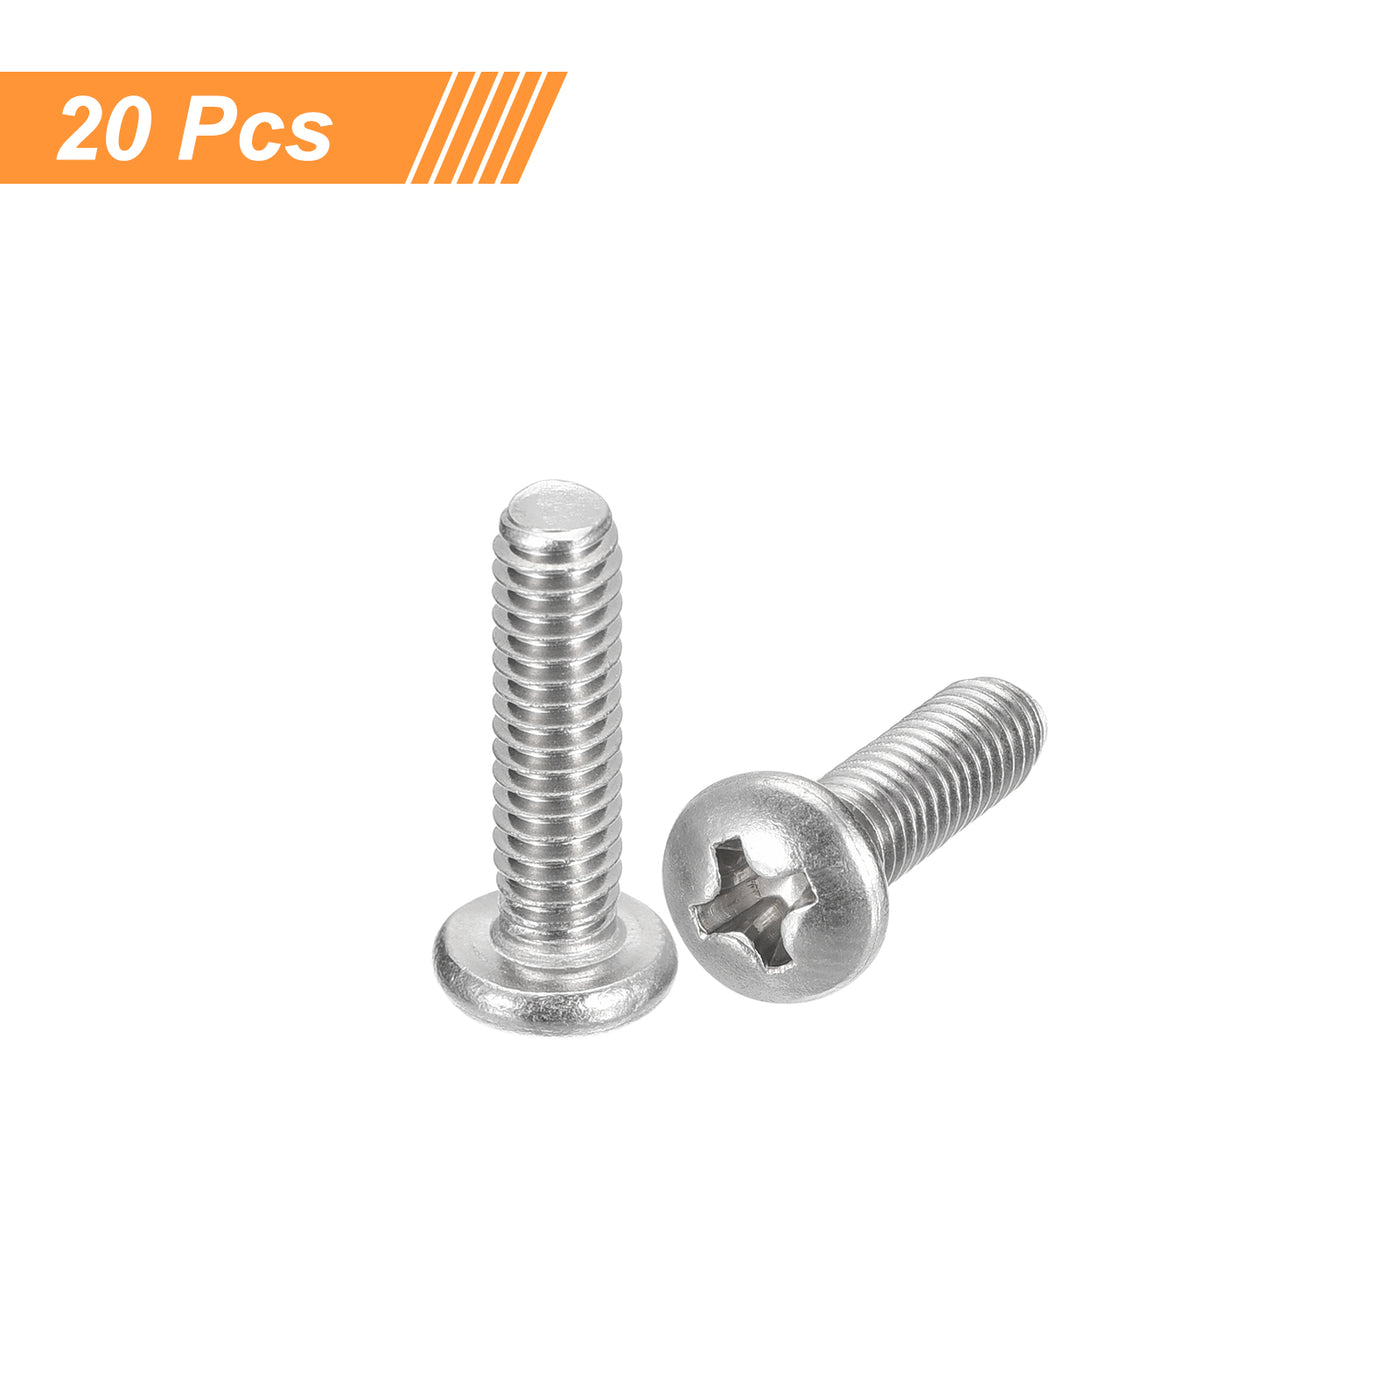 uxcell Uxcell #8-32x5/8" Pan Head Machine Screws, Stainless Steel 18-8 Screw, Pack of 20